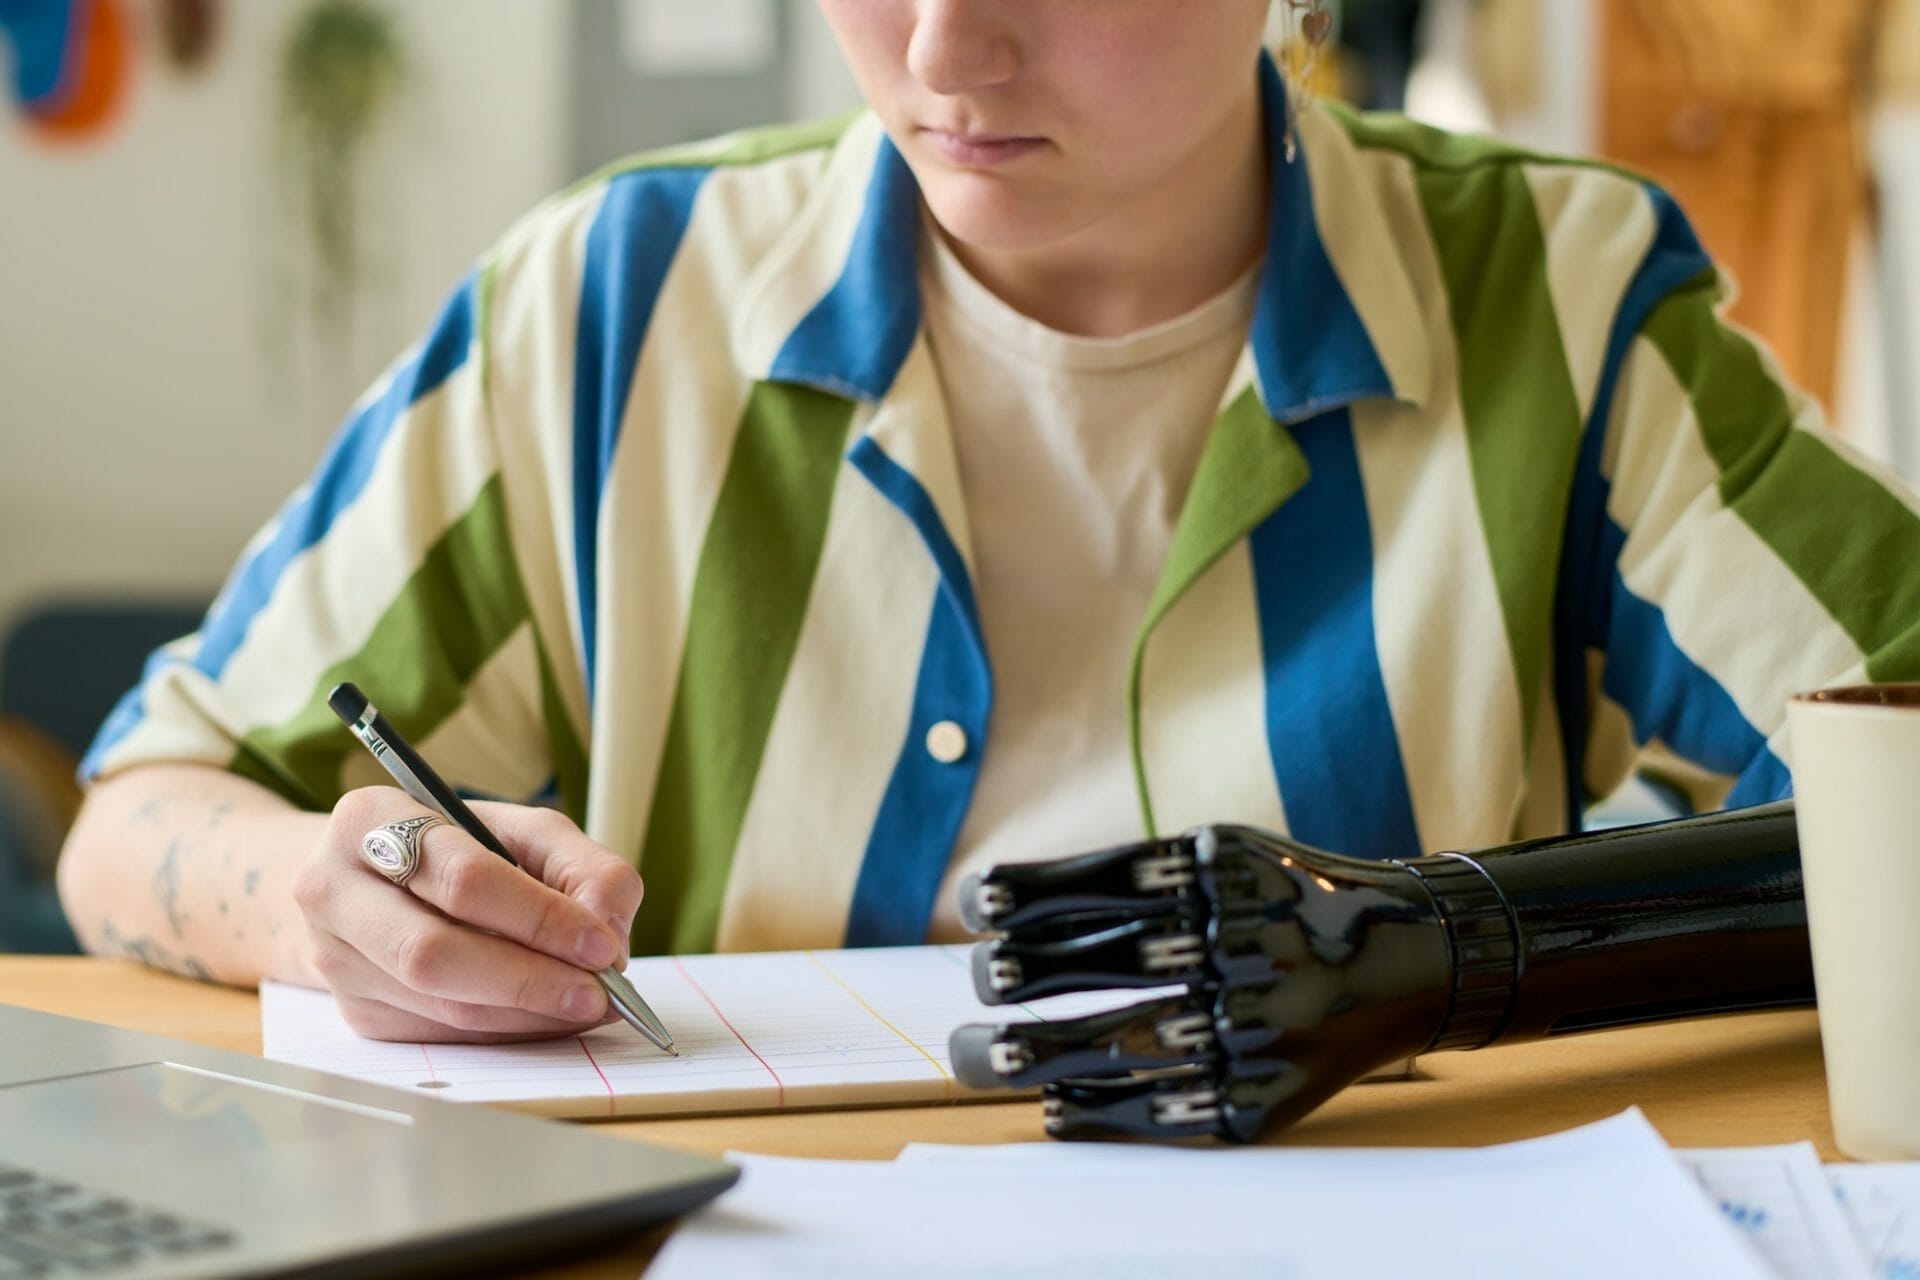 Hands of young businesswoman with arm prosthesis writing down working plan